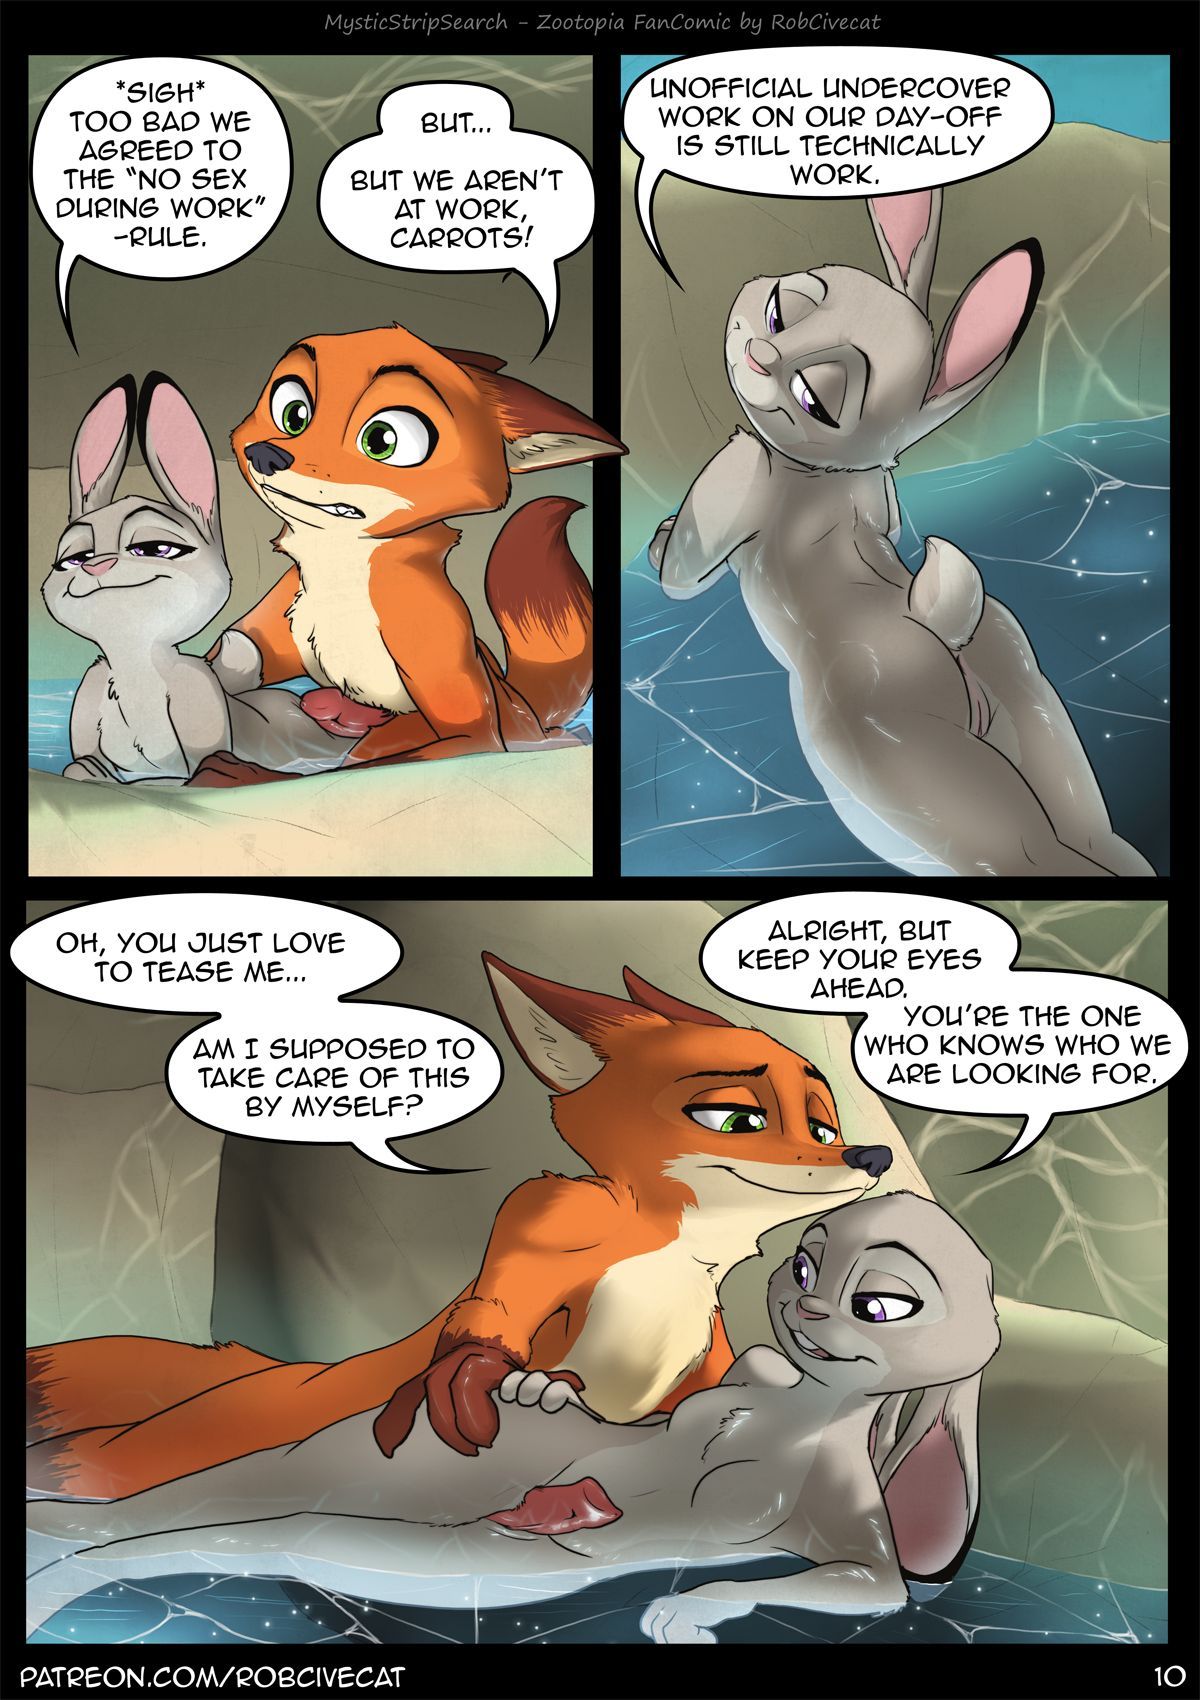 [RobCivecat] Mystic Strip Search (Zootopia) [Ongoing] 11